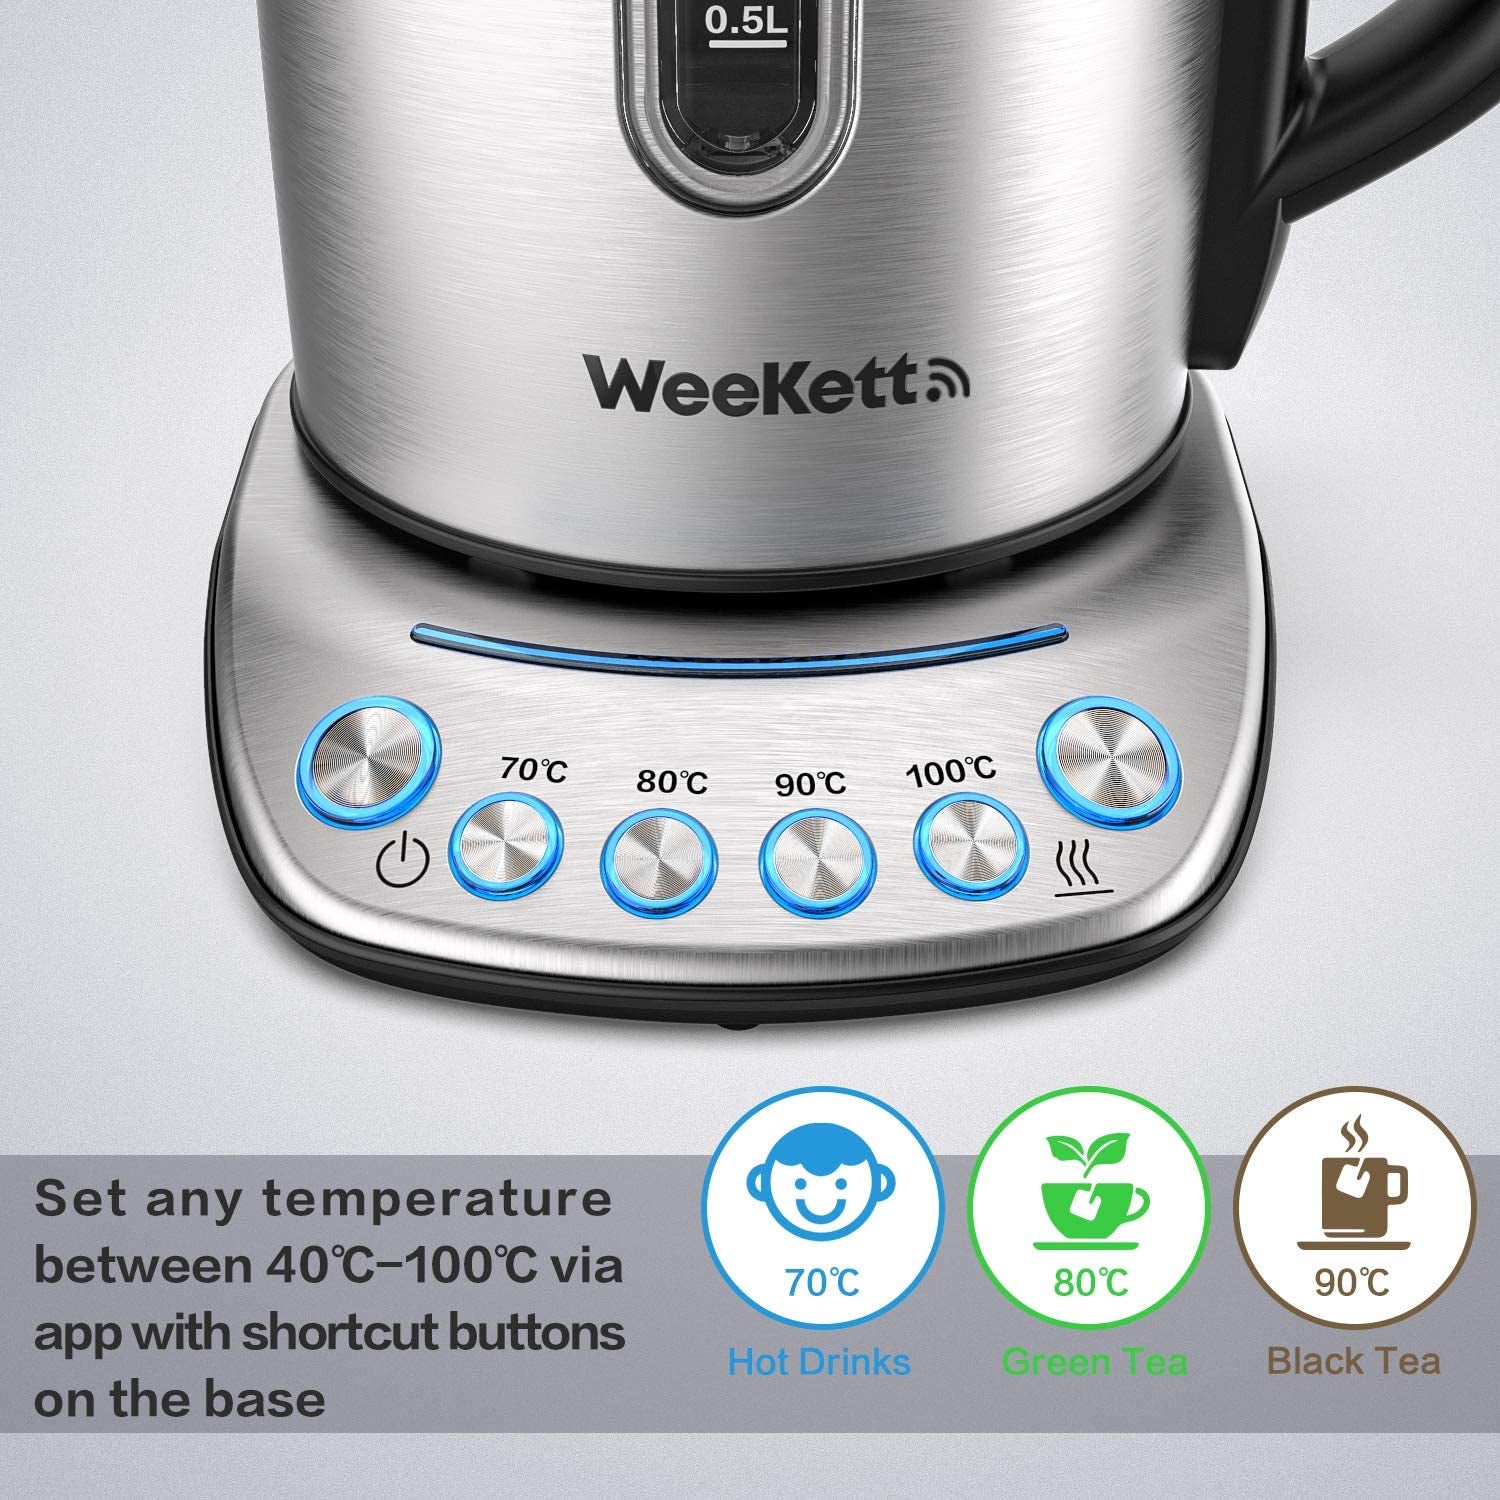 Smart Kettle by  - App Remote Control, Compatible with Alexa, Google Home and Siri | Digital Temperature Control 2200W with Keep Warm Function, Stainless Steel, 1.7L, Silver